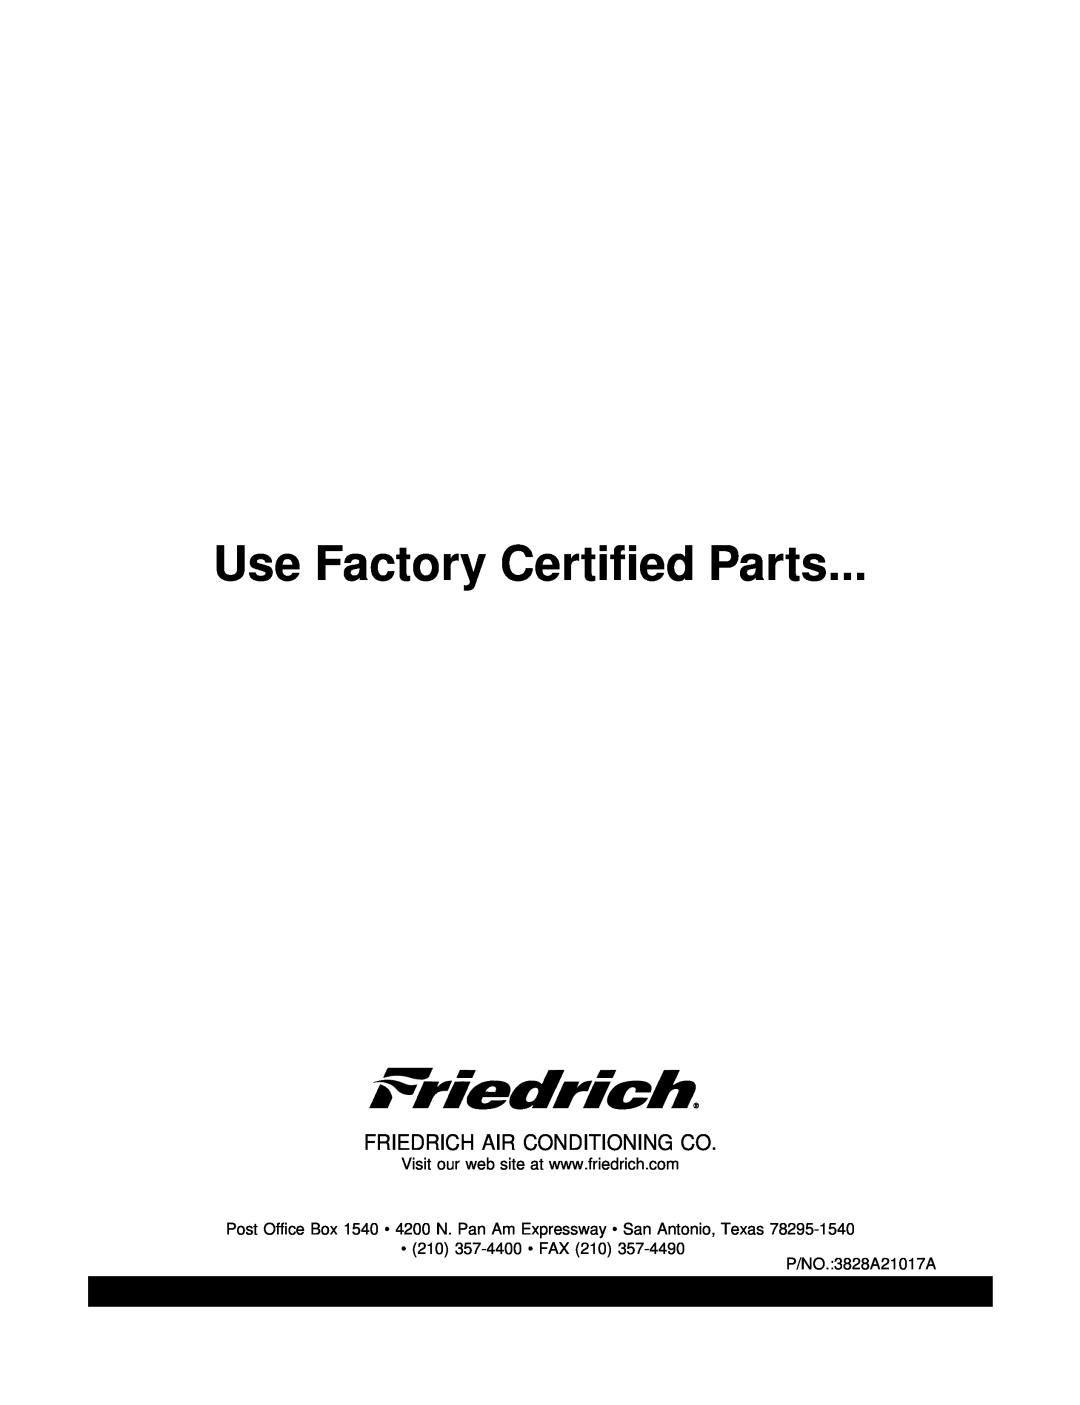 Friedrich ZQ05C10 manual Use Factory Certified Parts, Friedrich Air Conditioning Co 